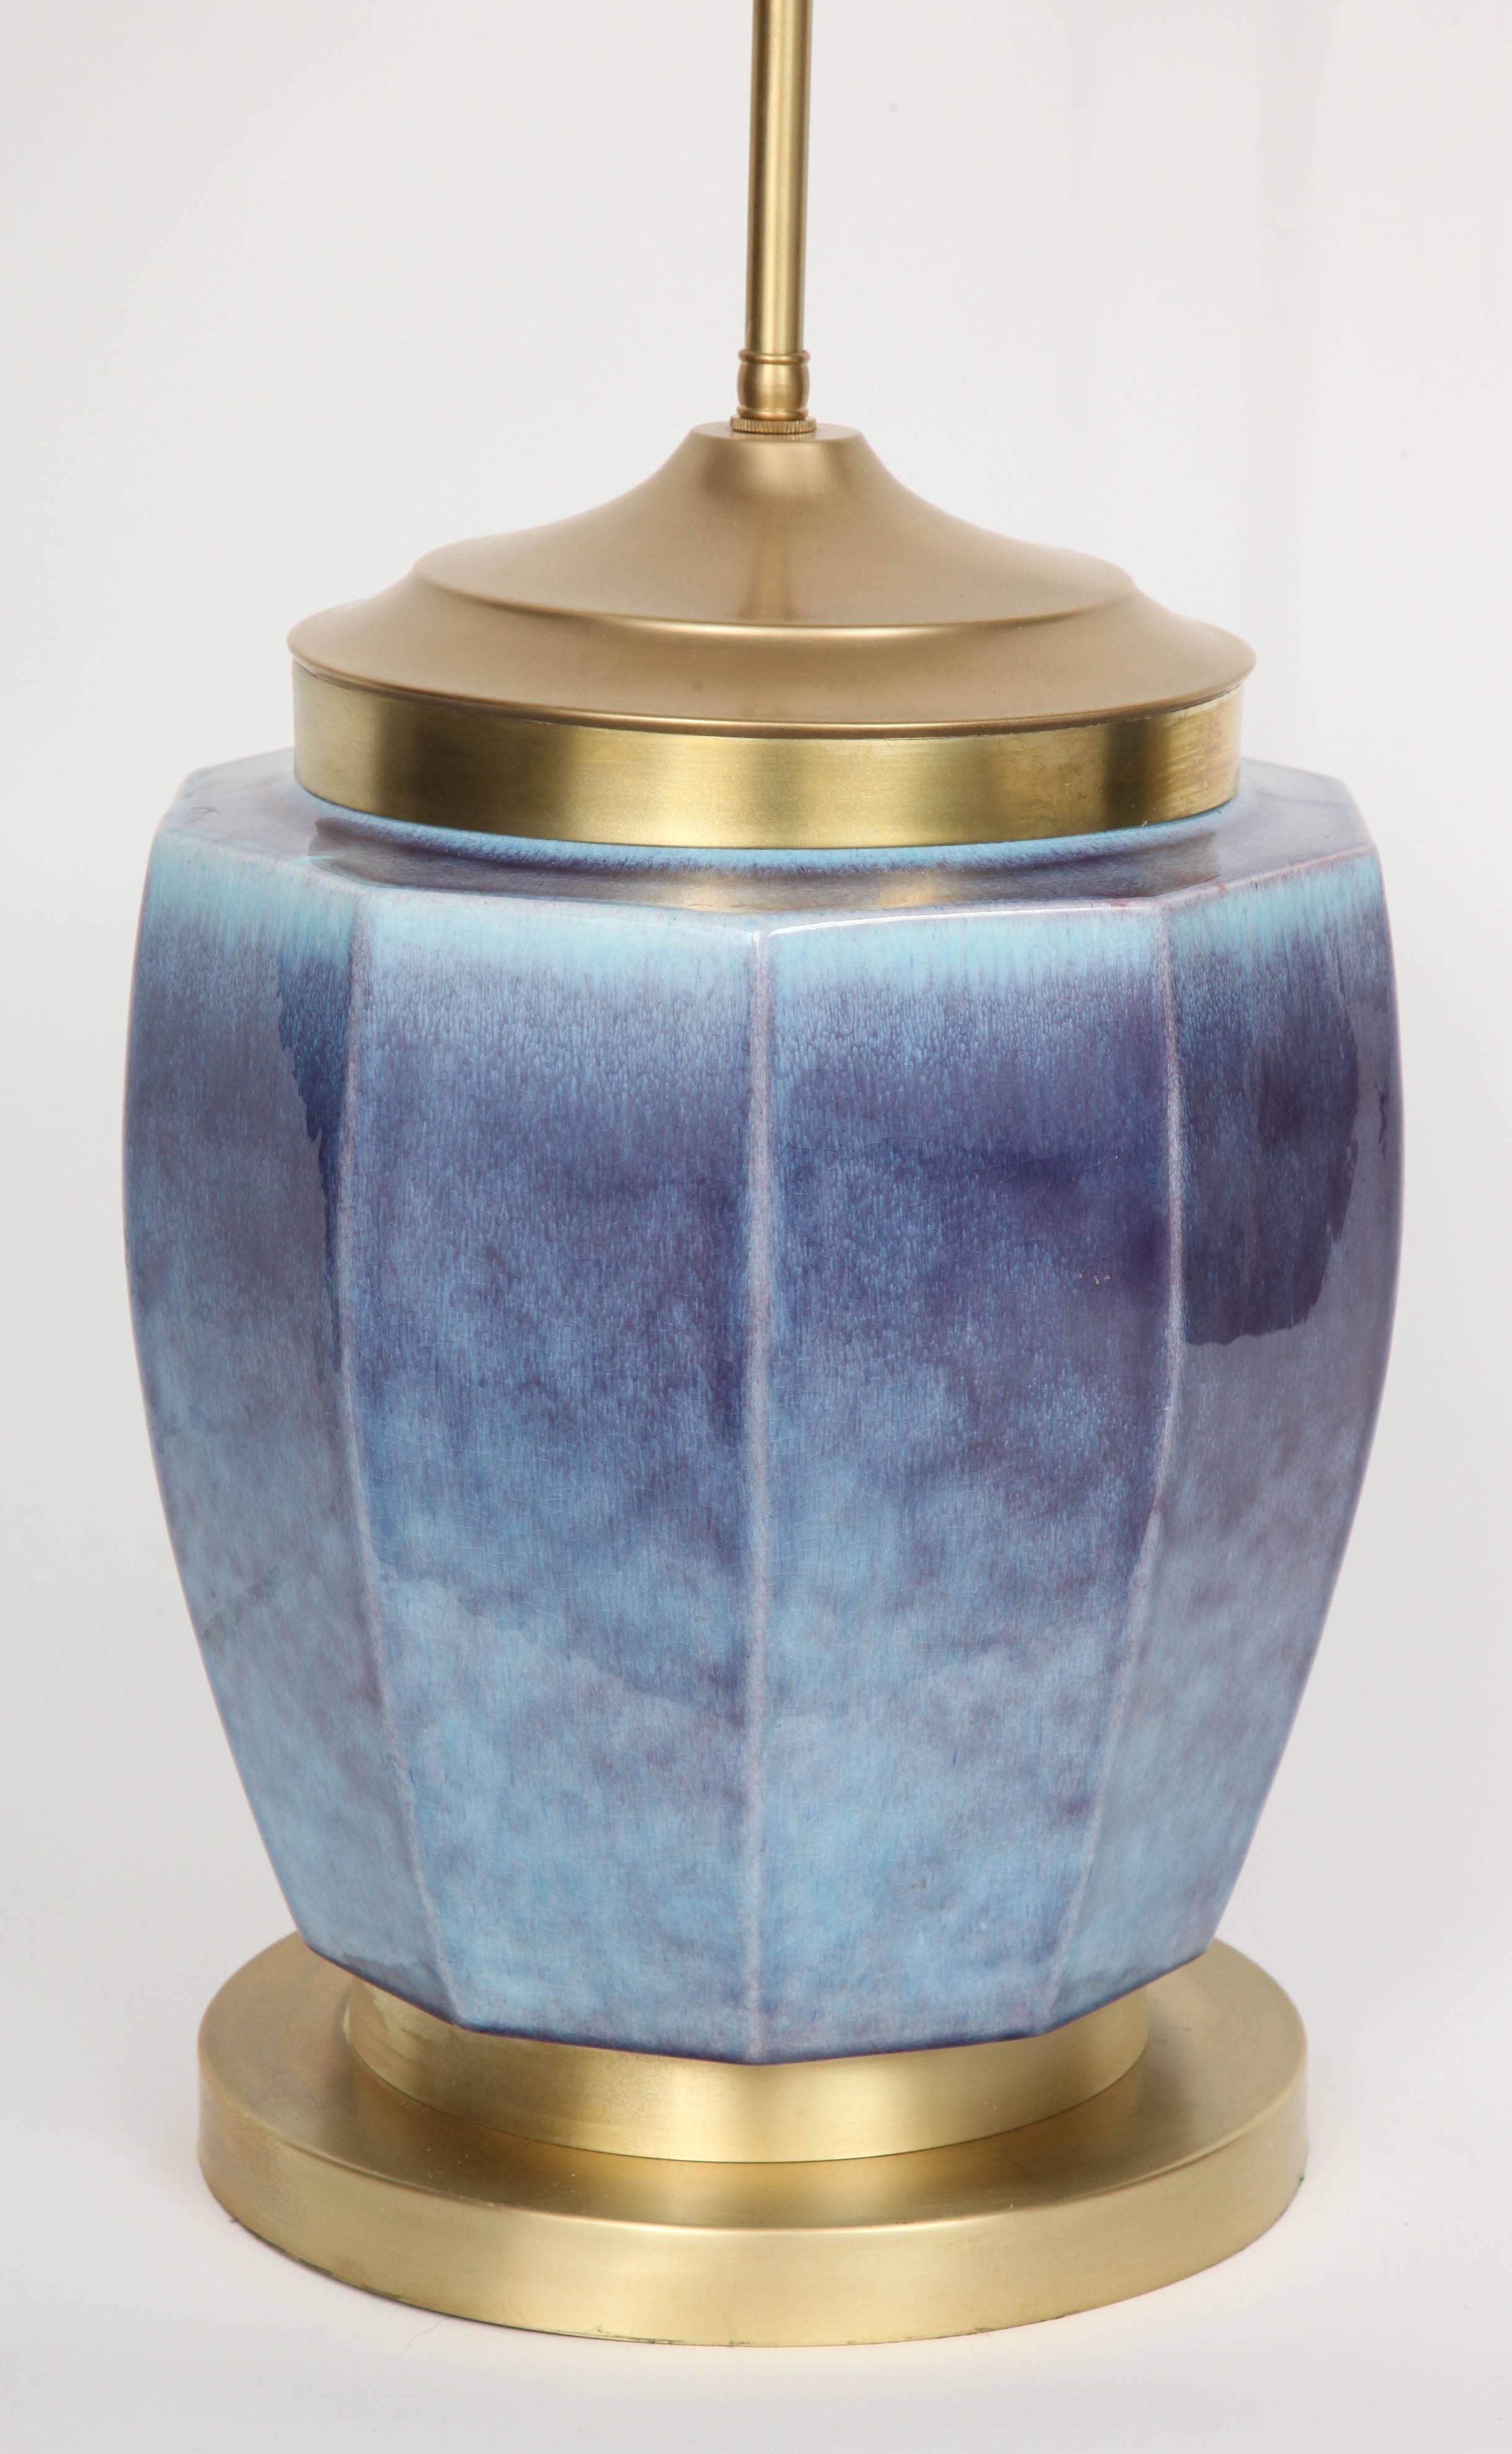 Large-scale Mid-Century ceramic lamp with subtle fluted perimeter in a striking mottled glaze in tones of violet and periwinkle blue. The large lamp sits on a satin finish brass base and has been rewired with a double pull chain socket.